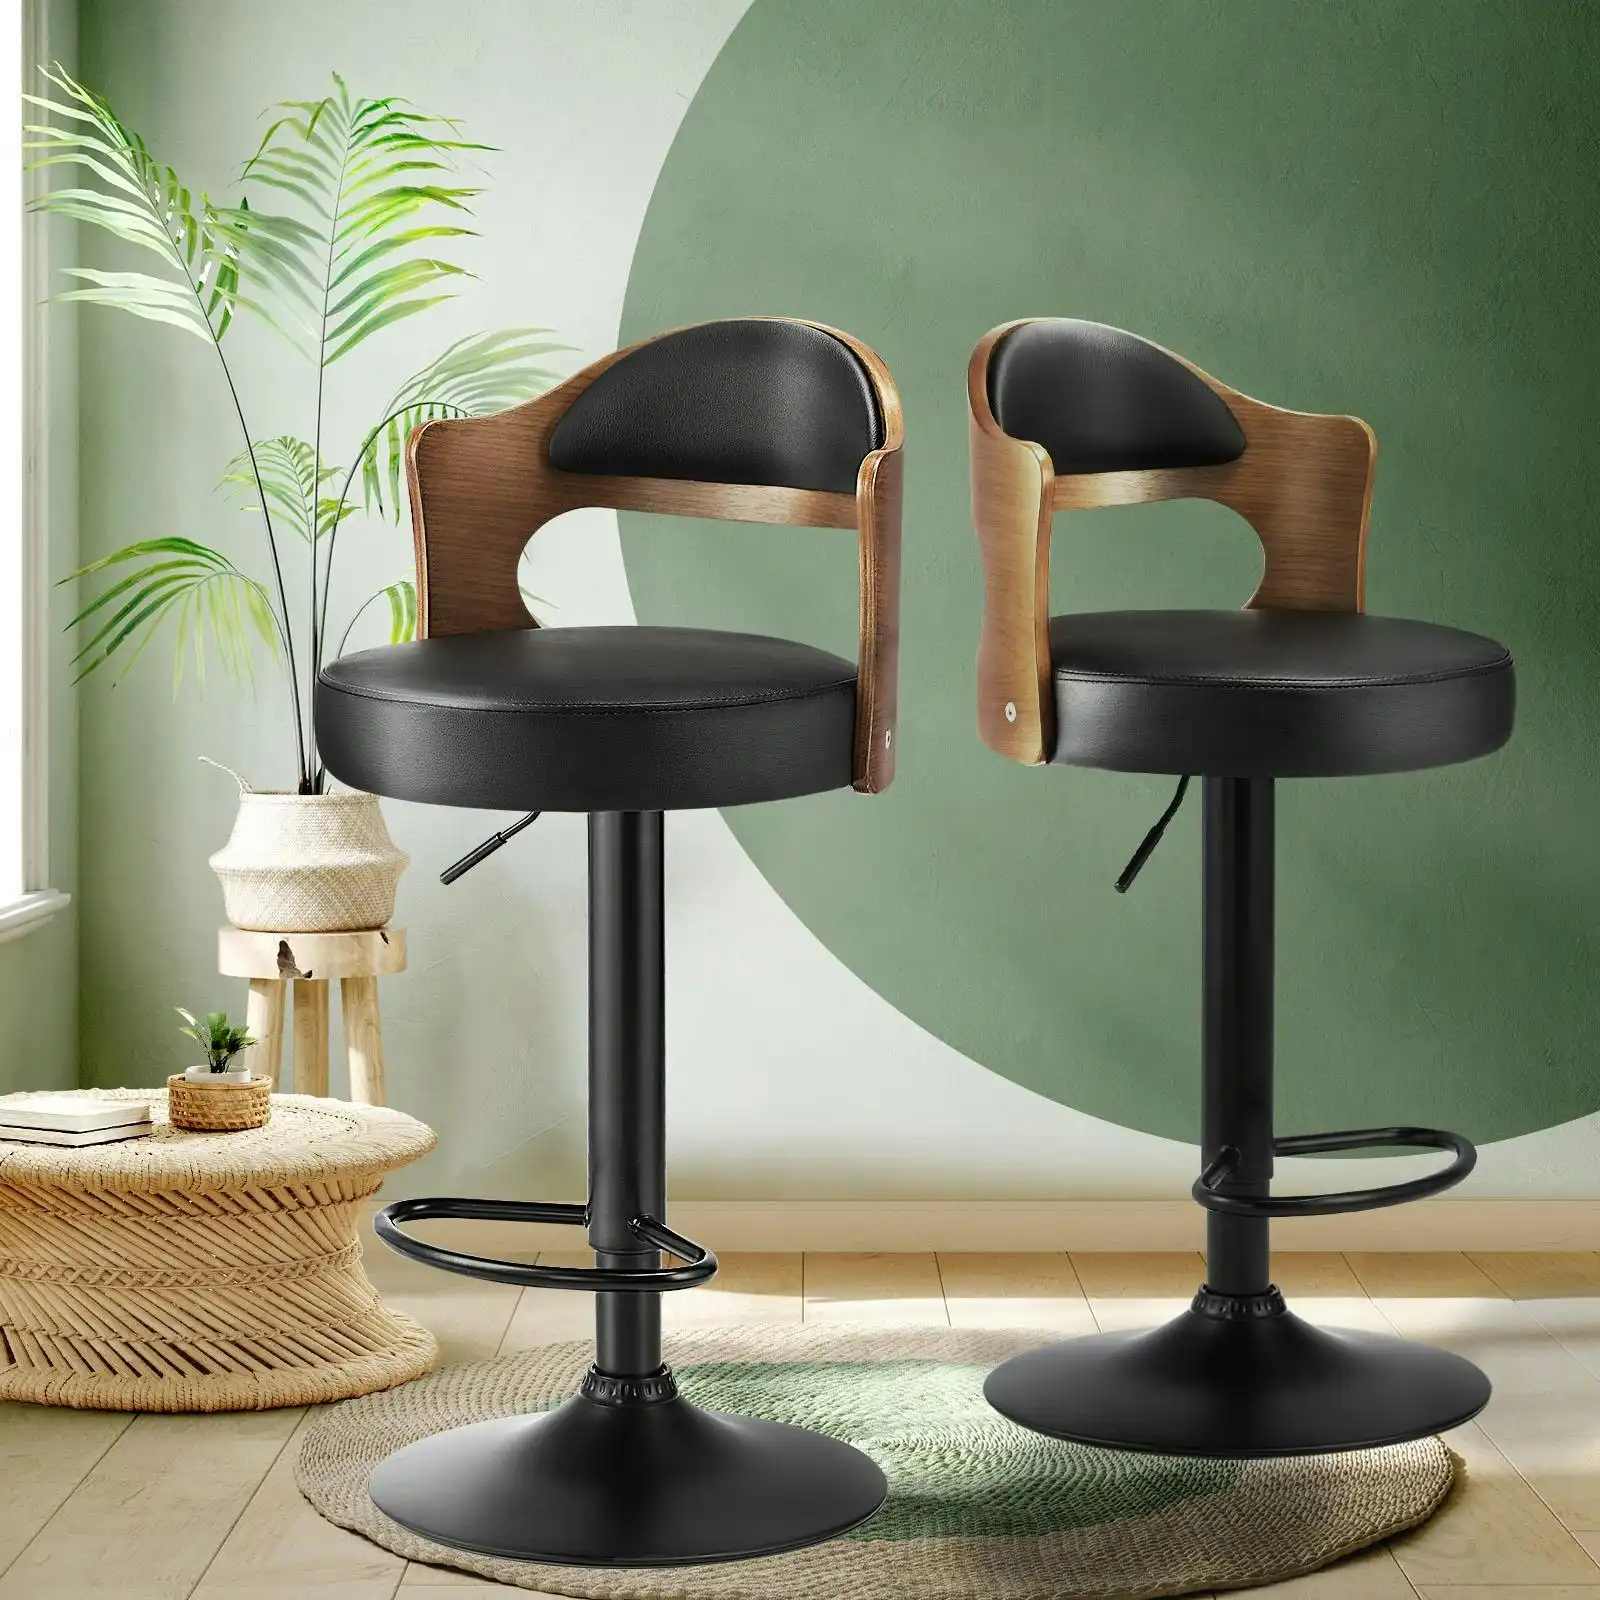 Oikiture Bar Stools Kitchen Swivel Barstool Chair Gas Lift Metal Leather x2